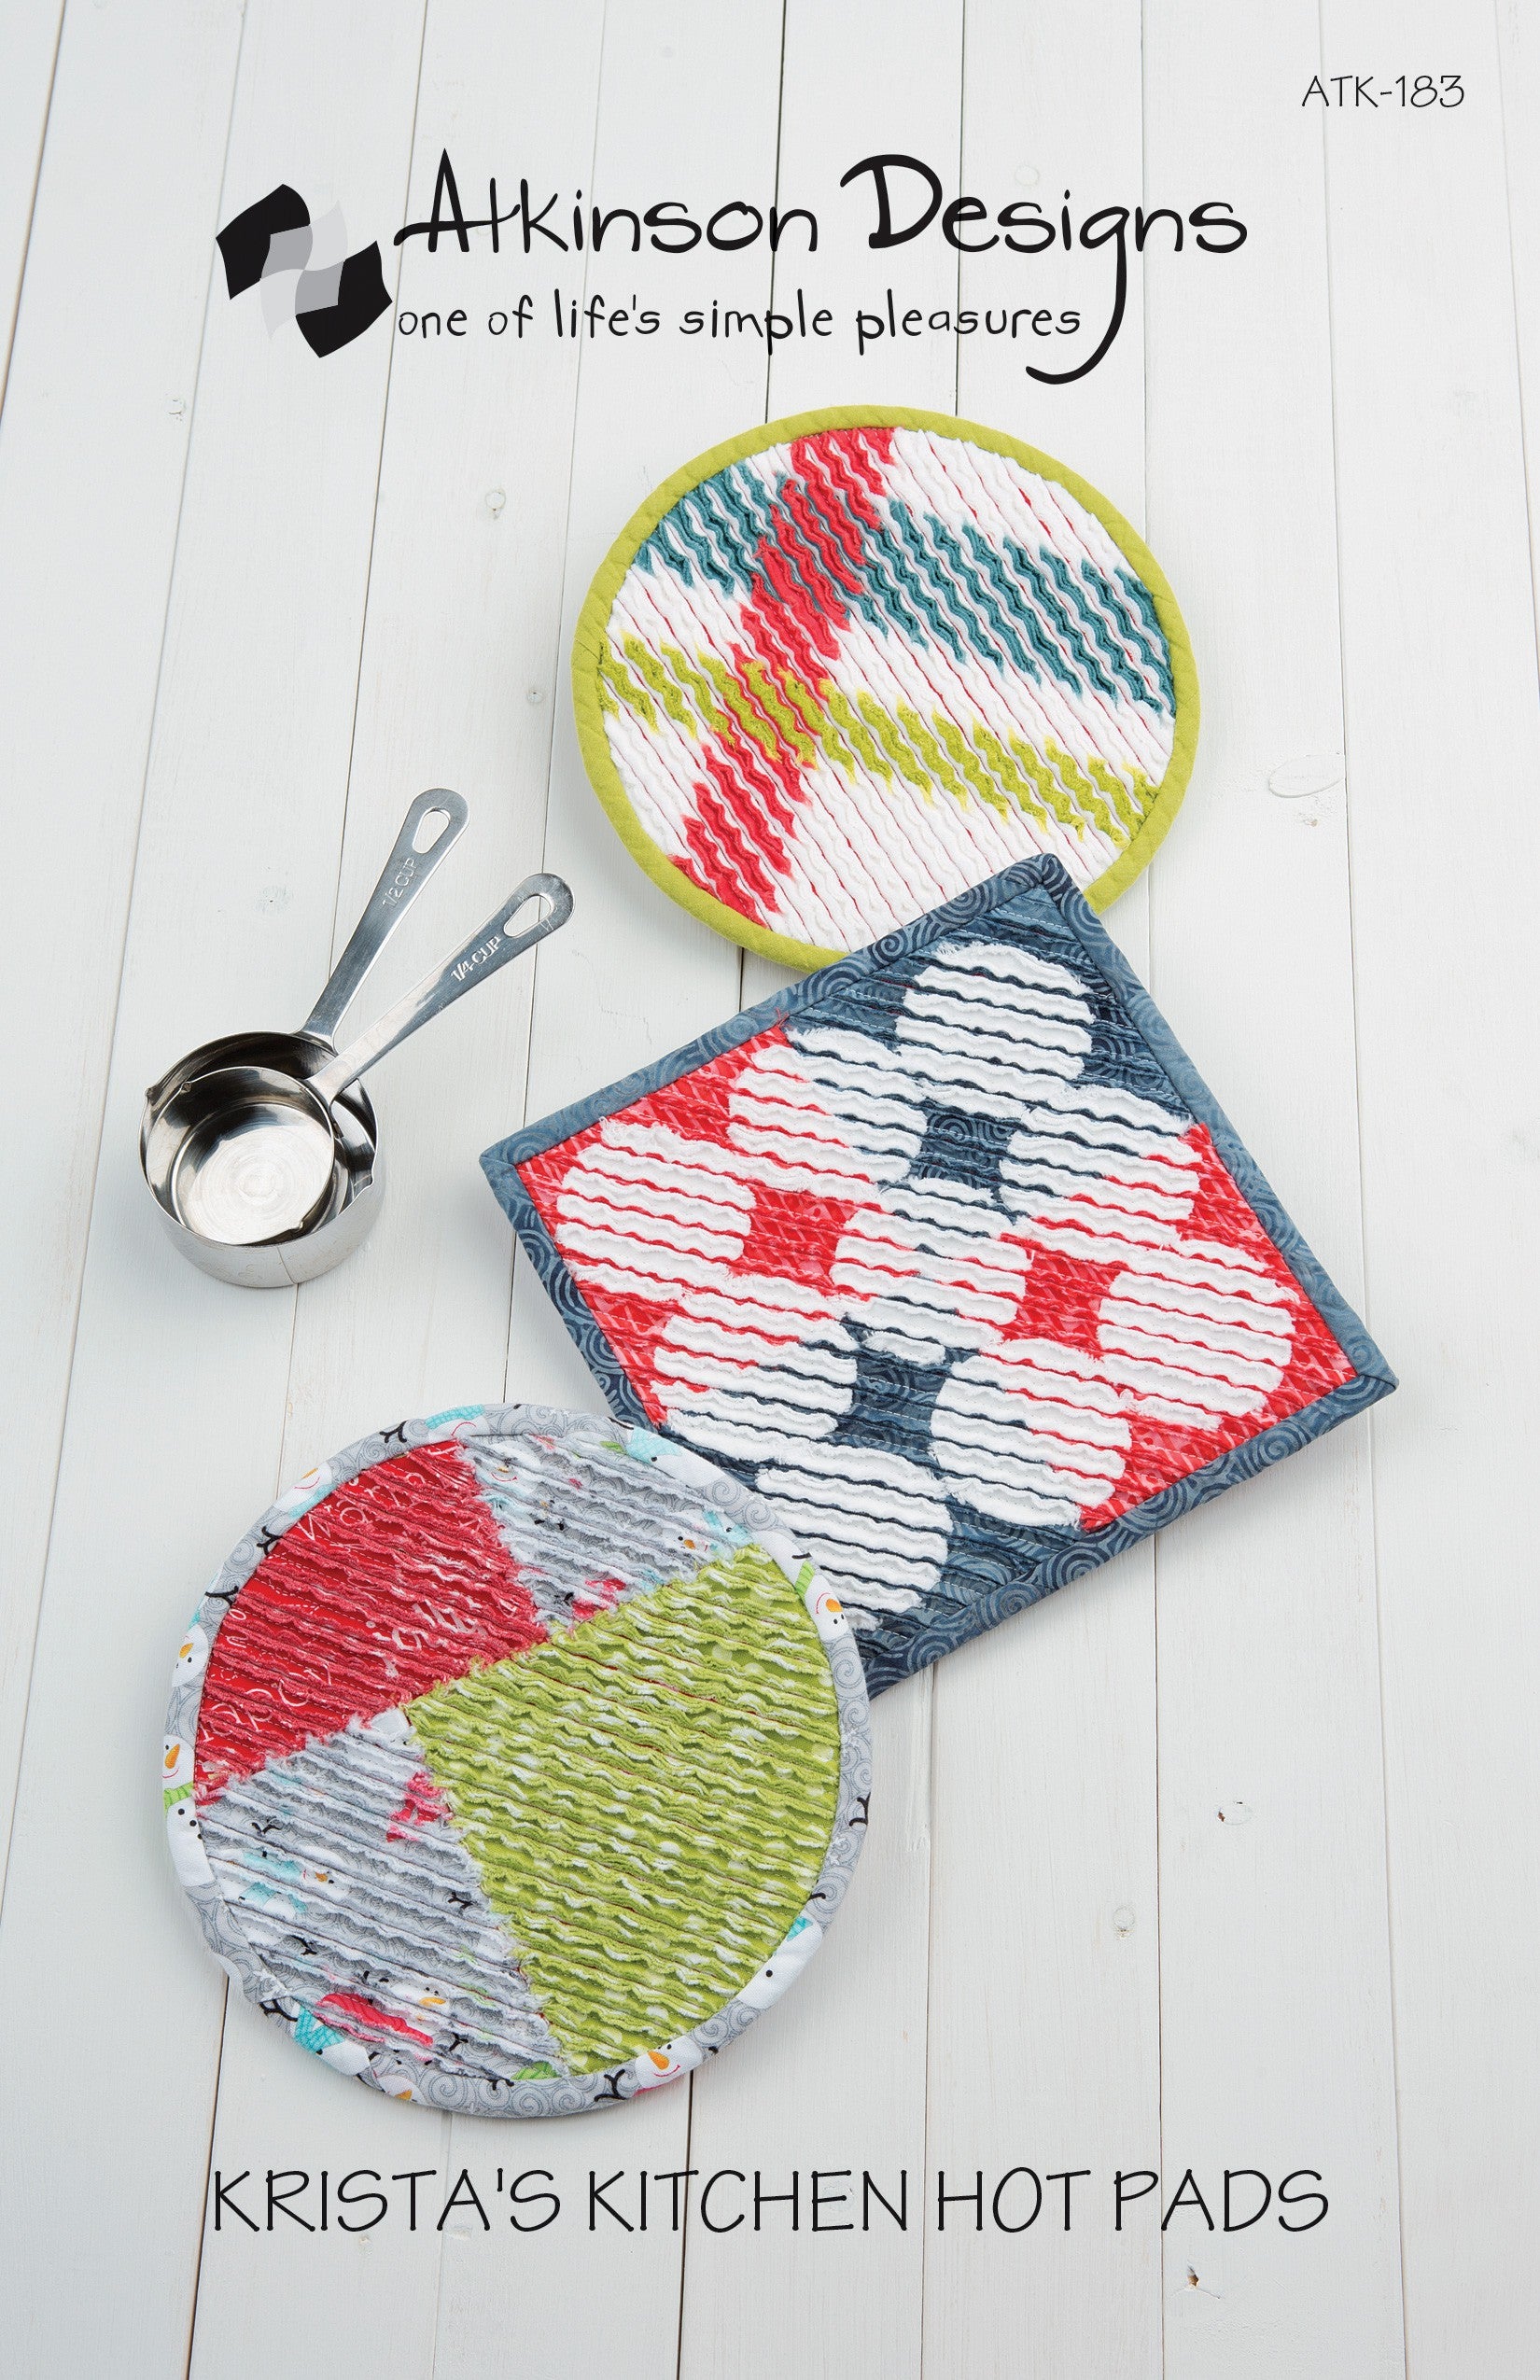 Krista's Kitchen Hot Pads Sewing Pattern by Terry Atkinson of Atkinson Designs